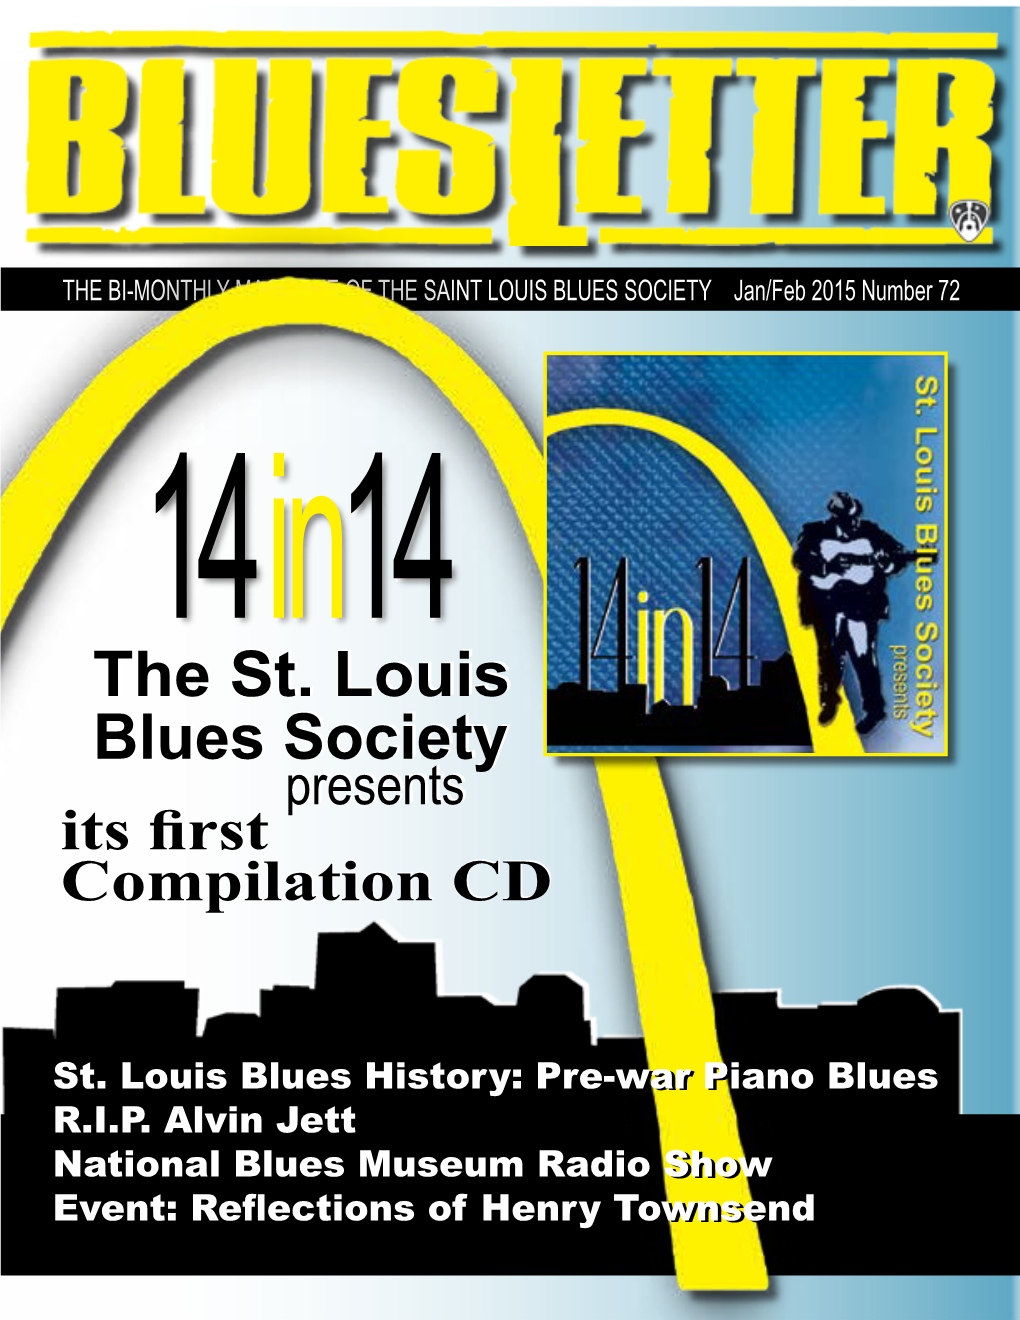 St. Louis Blues Society Volunteer With